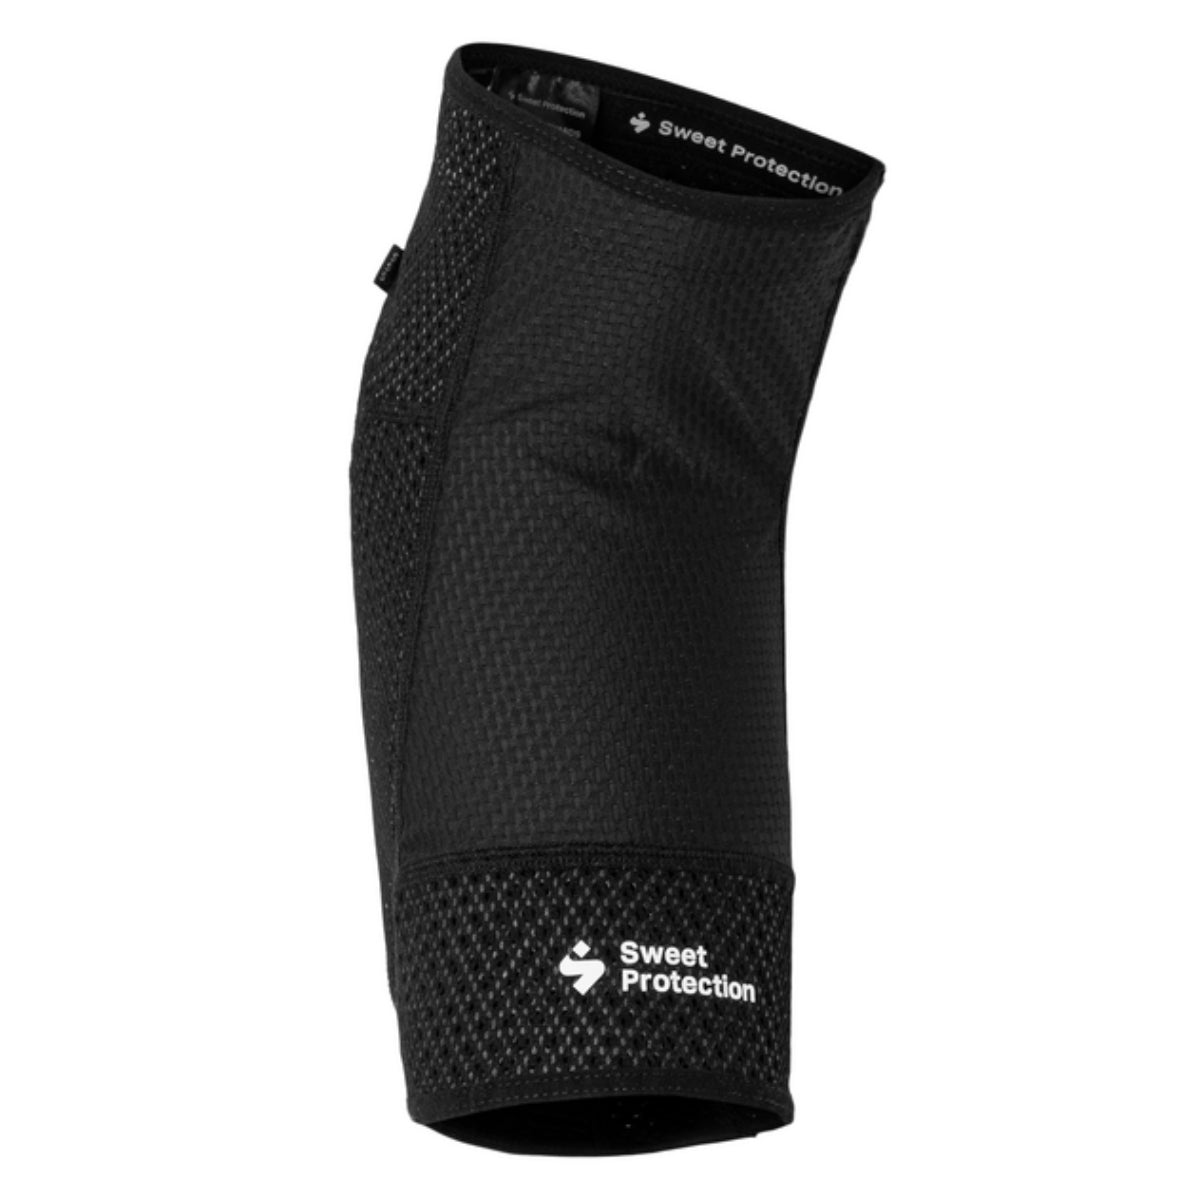 Sweet Protection  - Knee Guards Light - Black